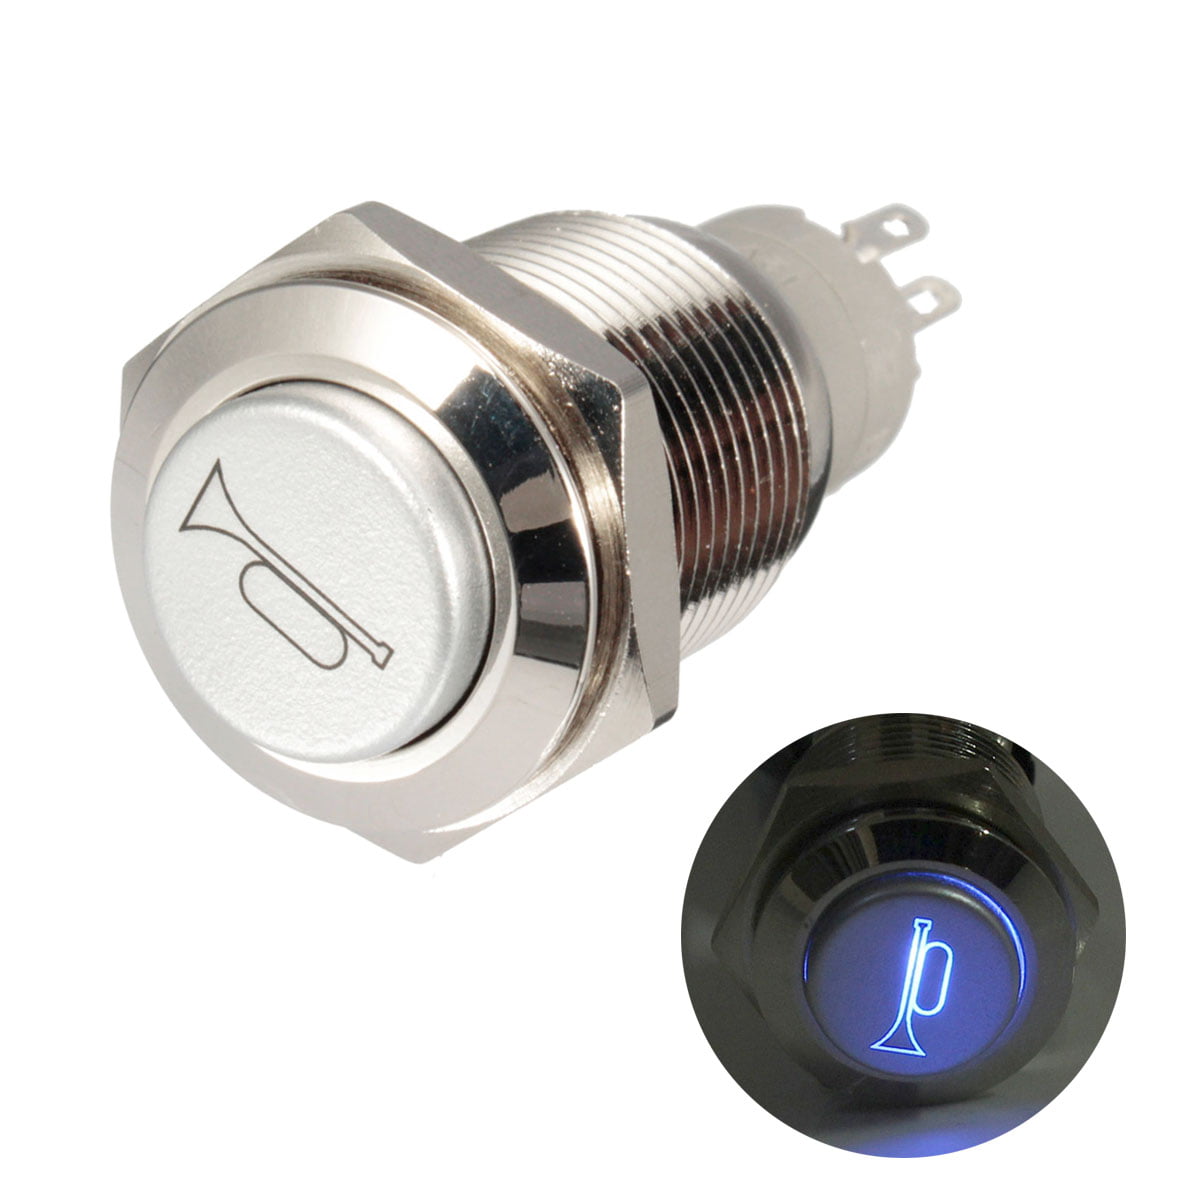 Katigan 12V 16mm Car LED Light Momentary Horn Button Metal Switch Push Button red